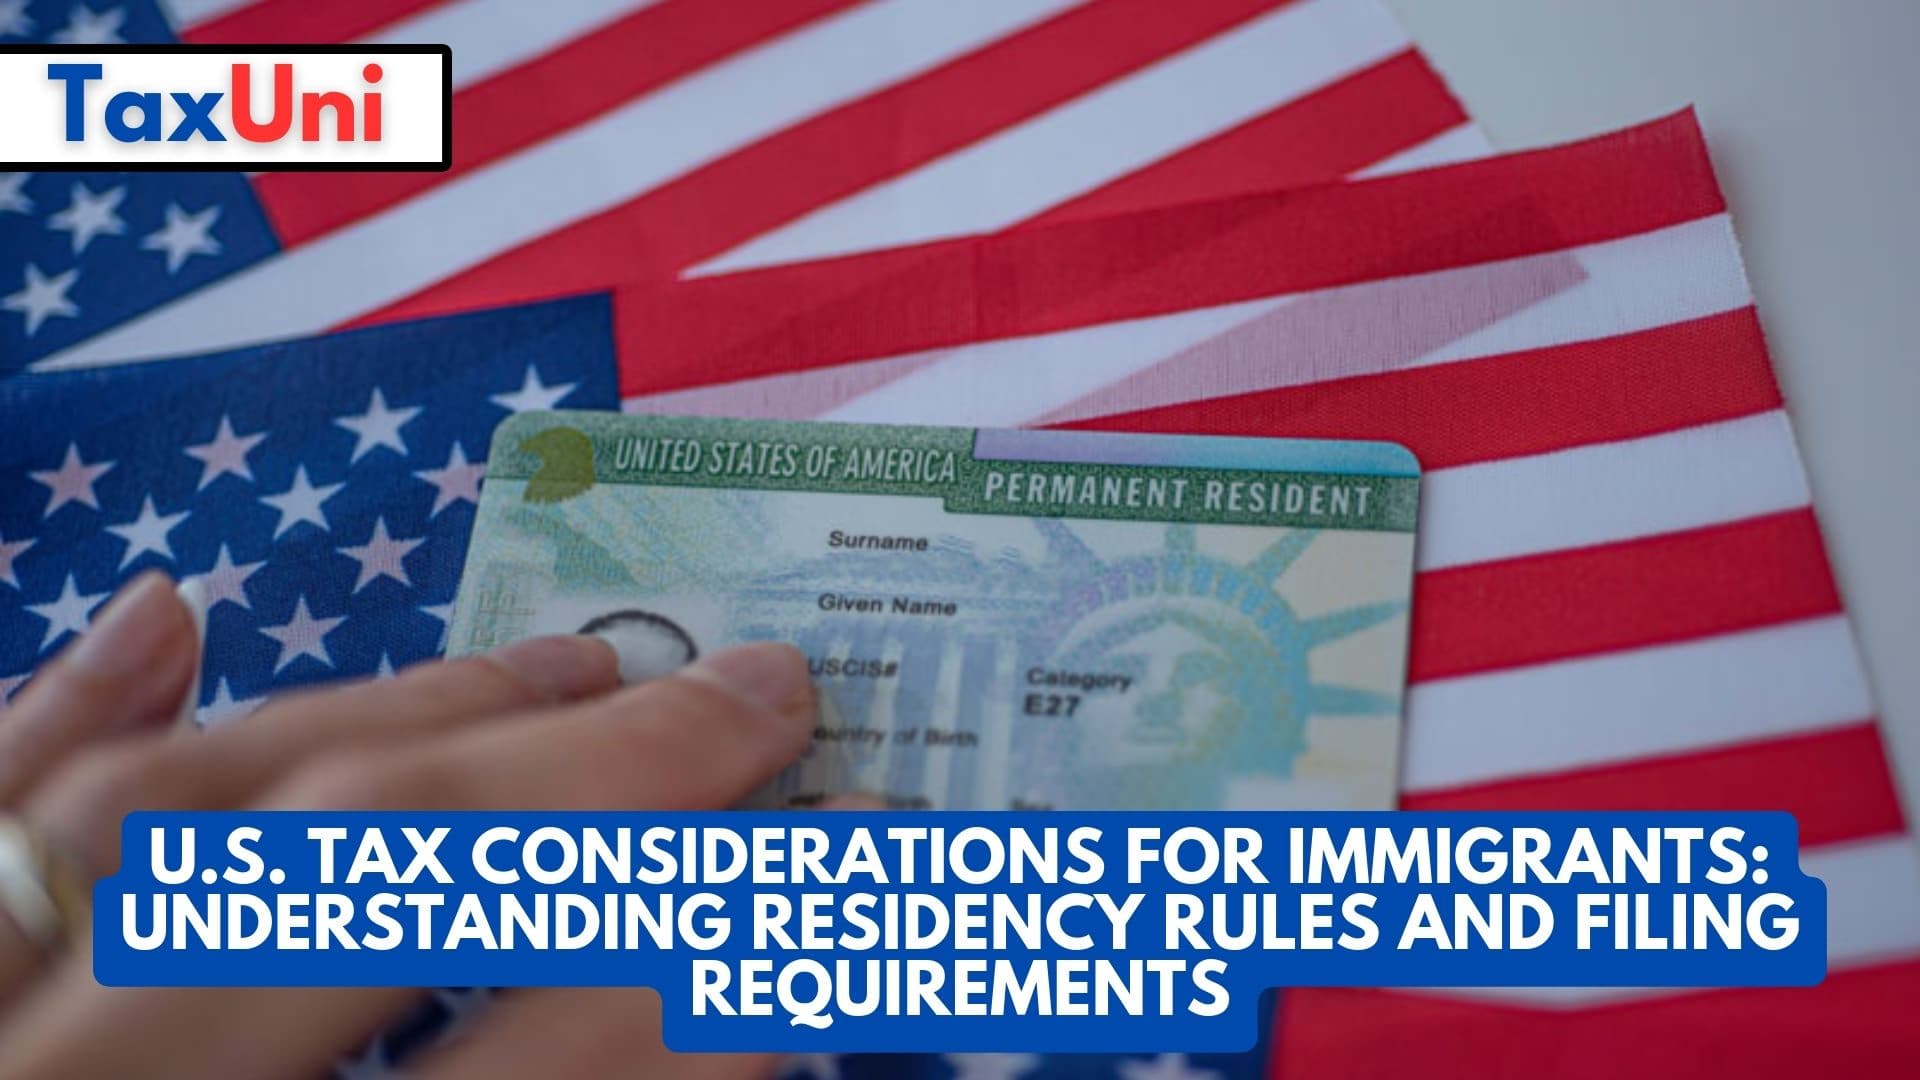 U.S. Tax Considerations for Immigrants Understanding Residency Rules and Filing Requirements